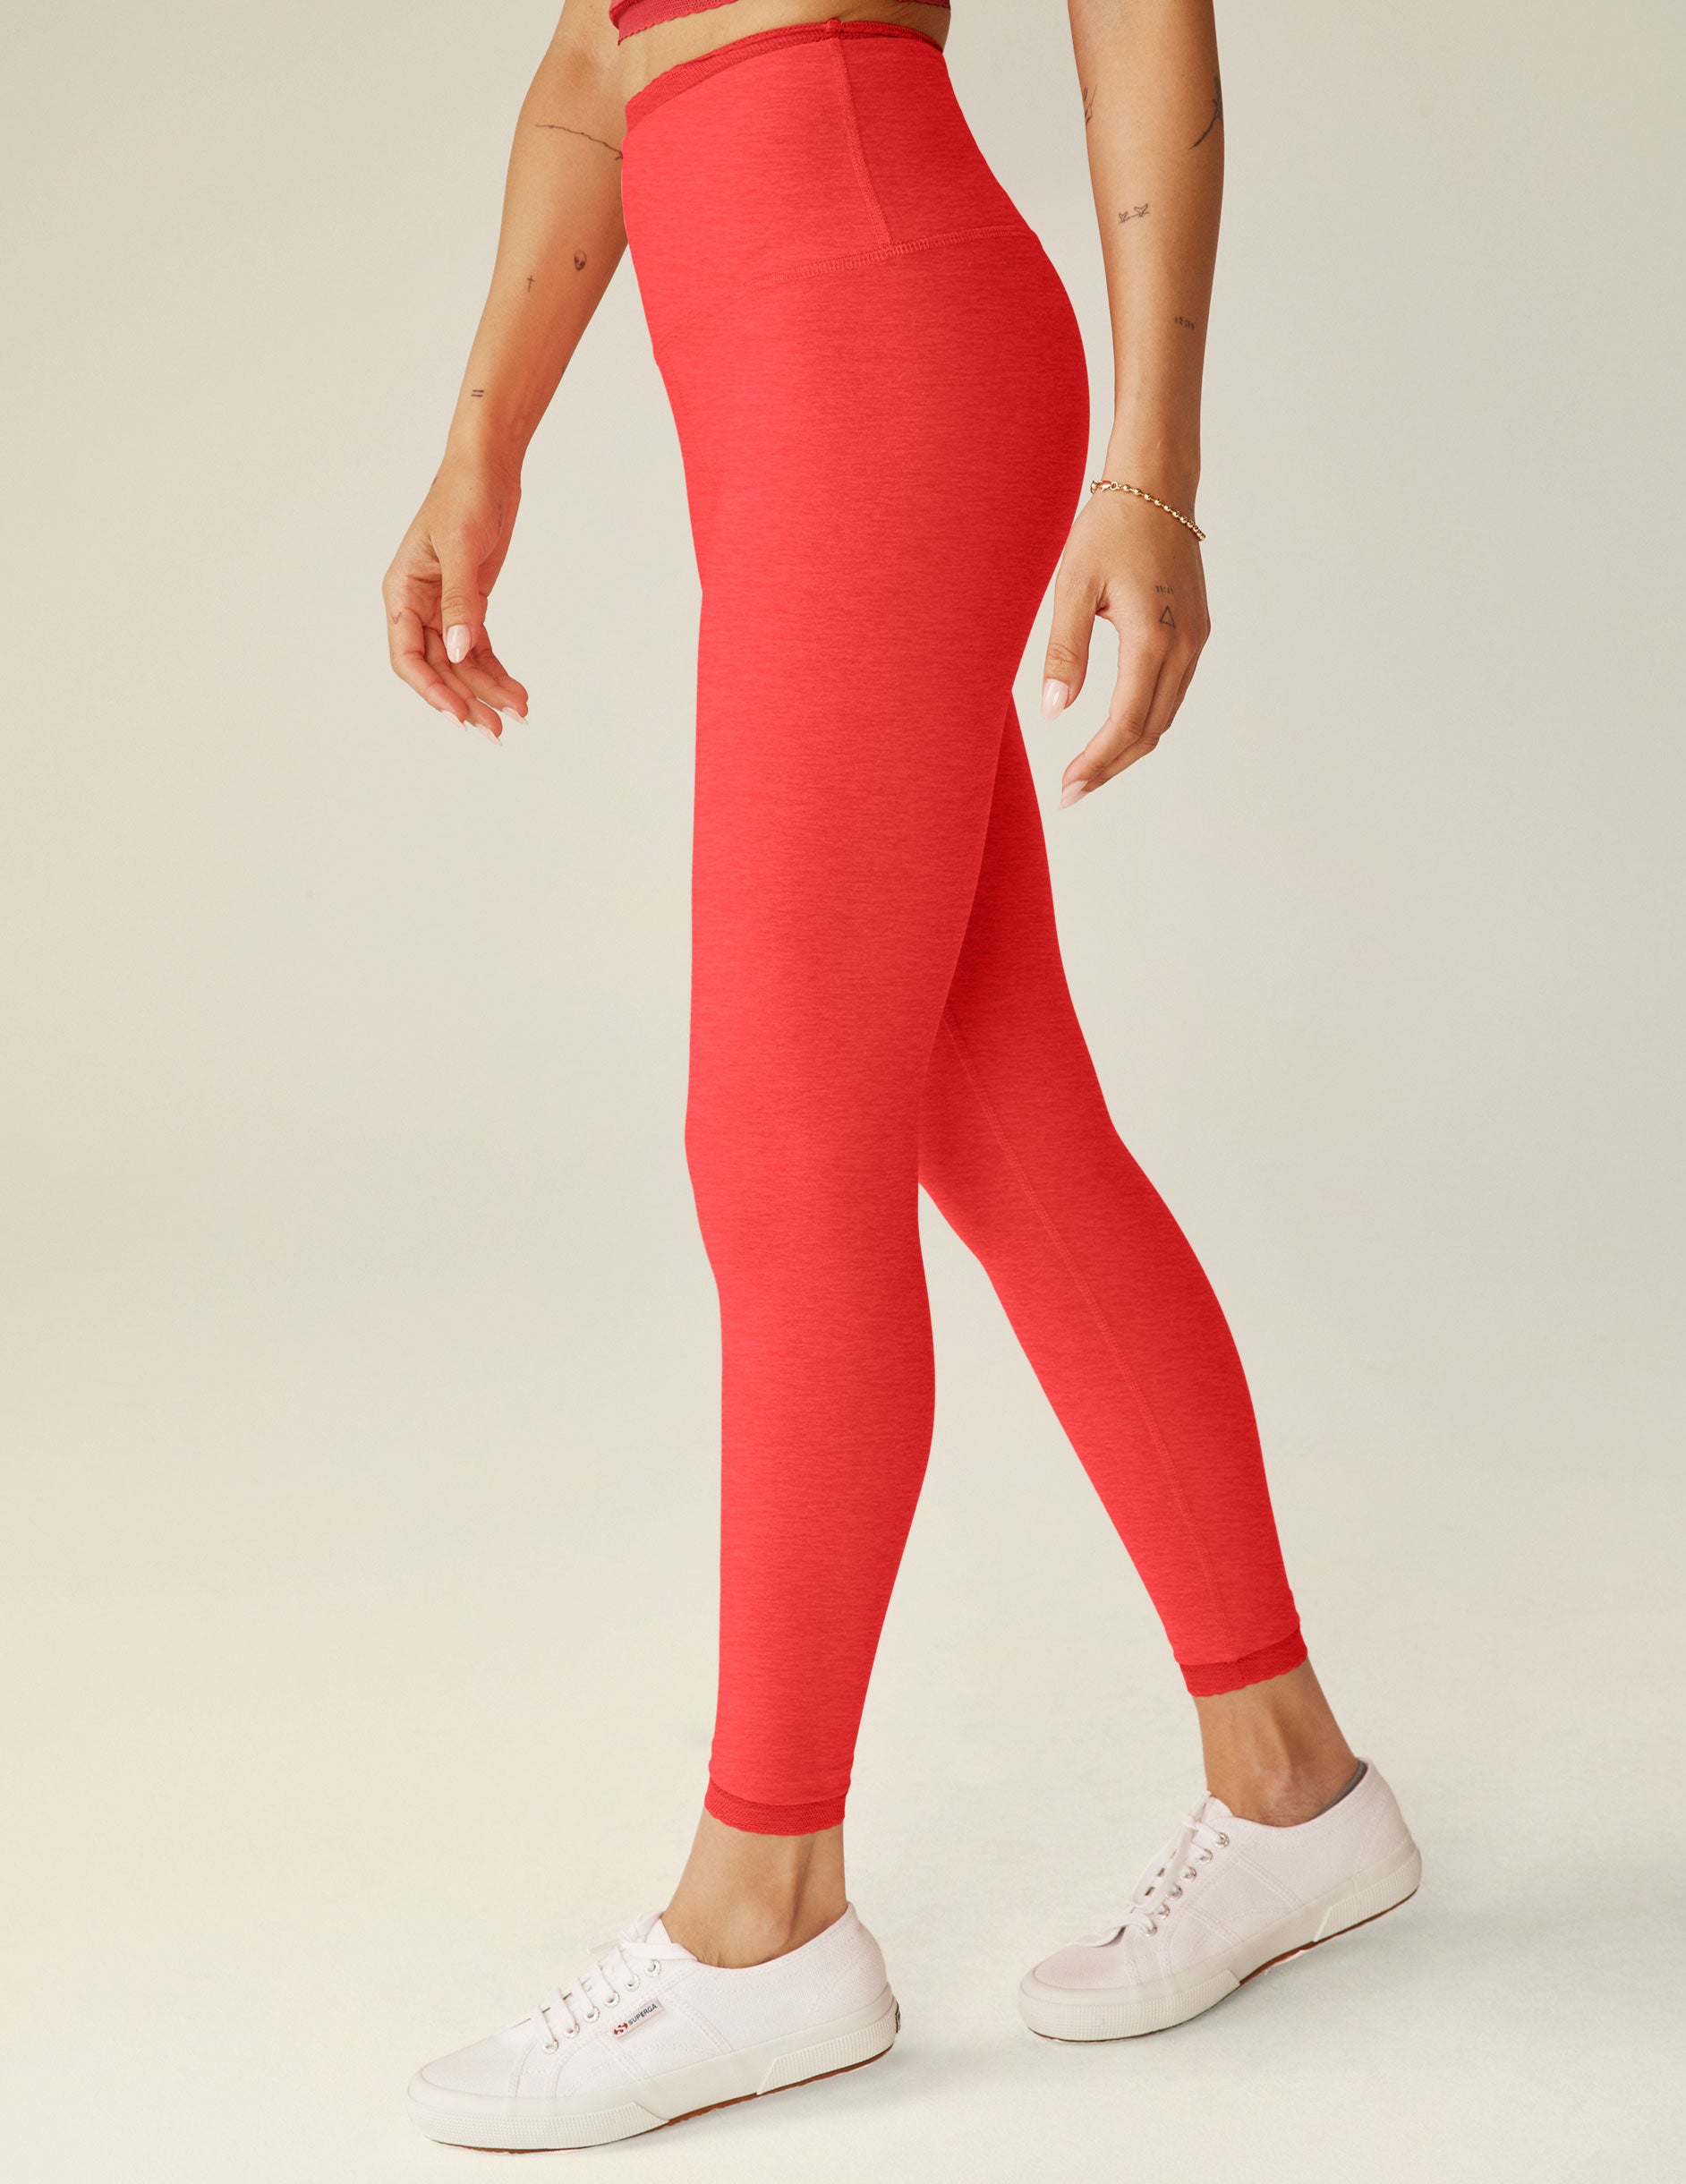 red high-waisted midi leggings with lace trim at the waistband and lace trim at ankles.